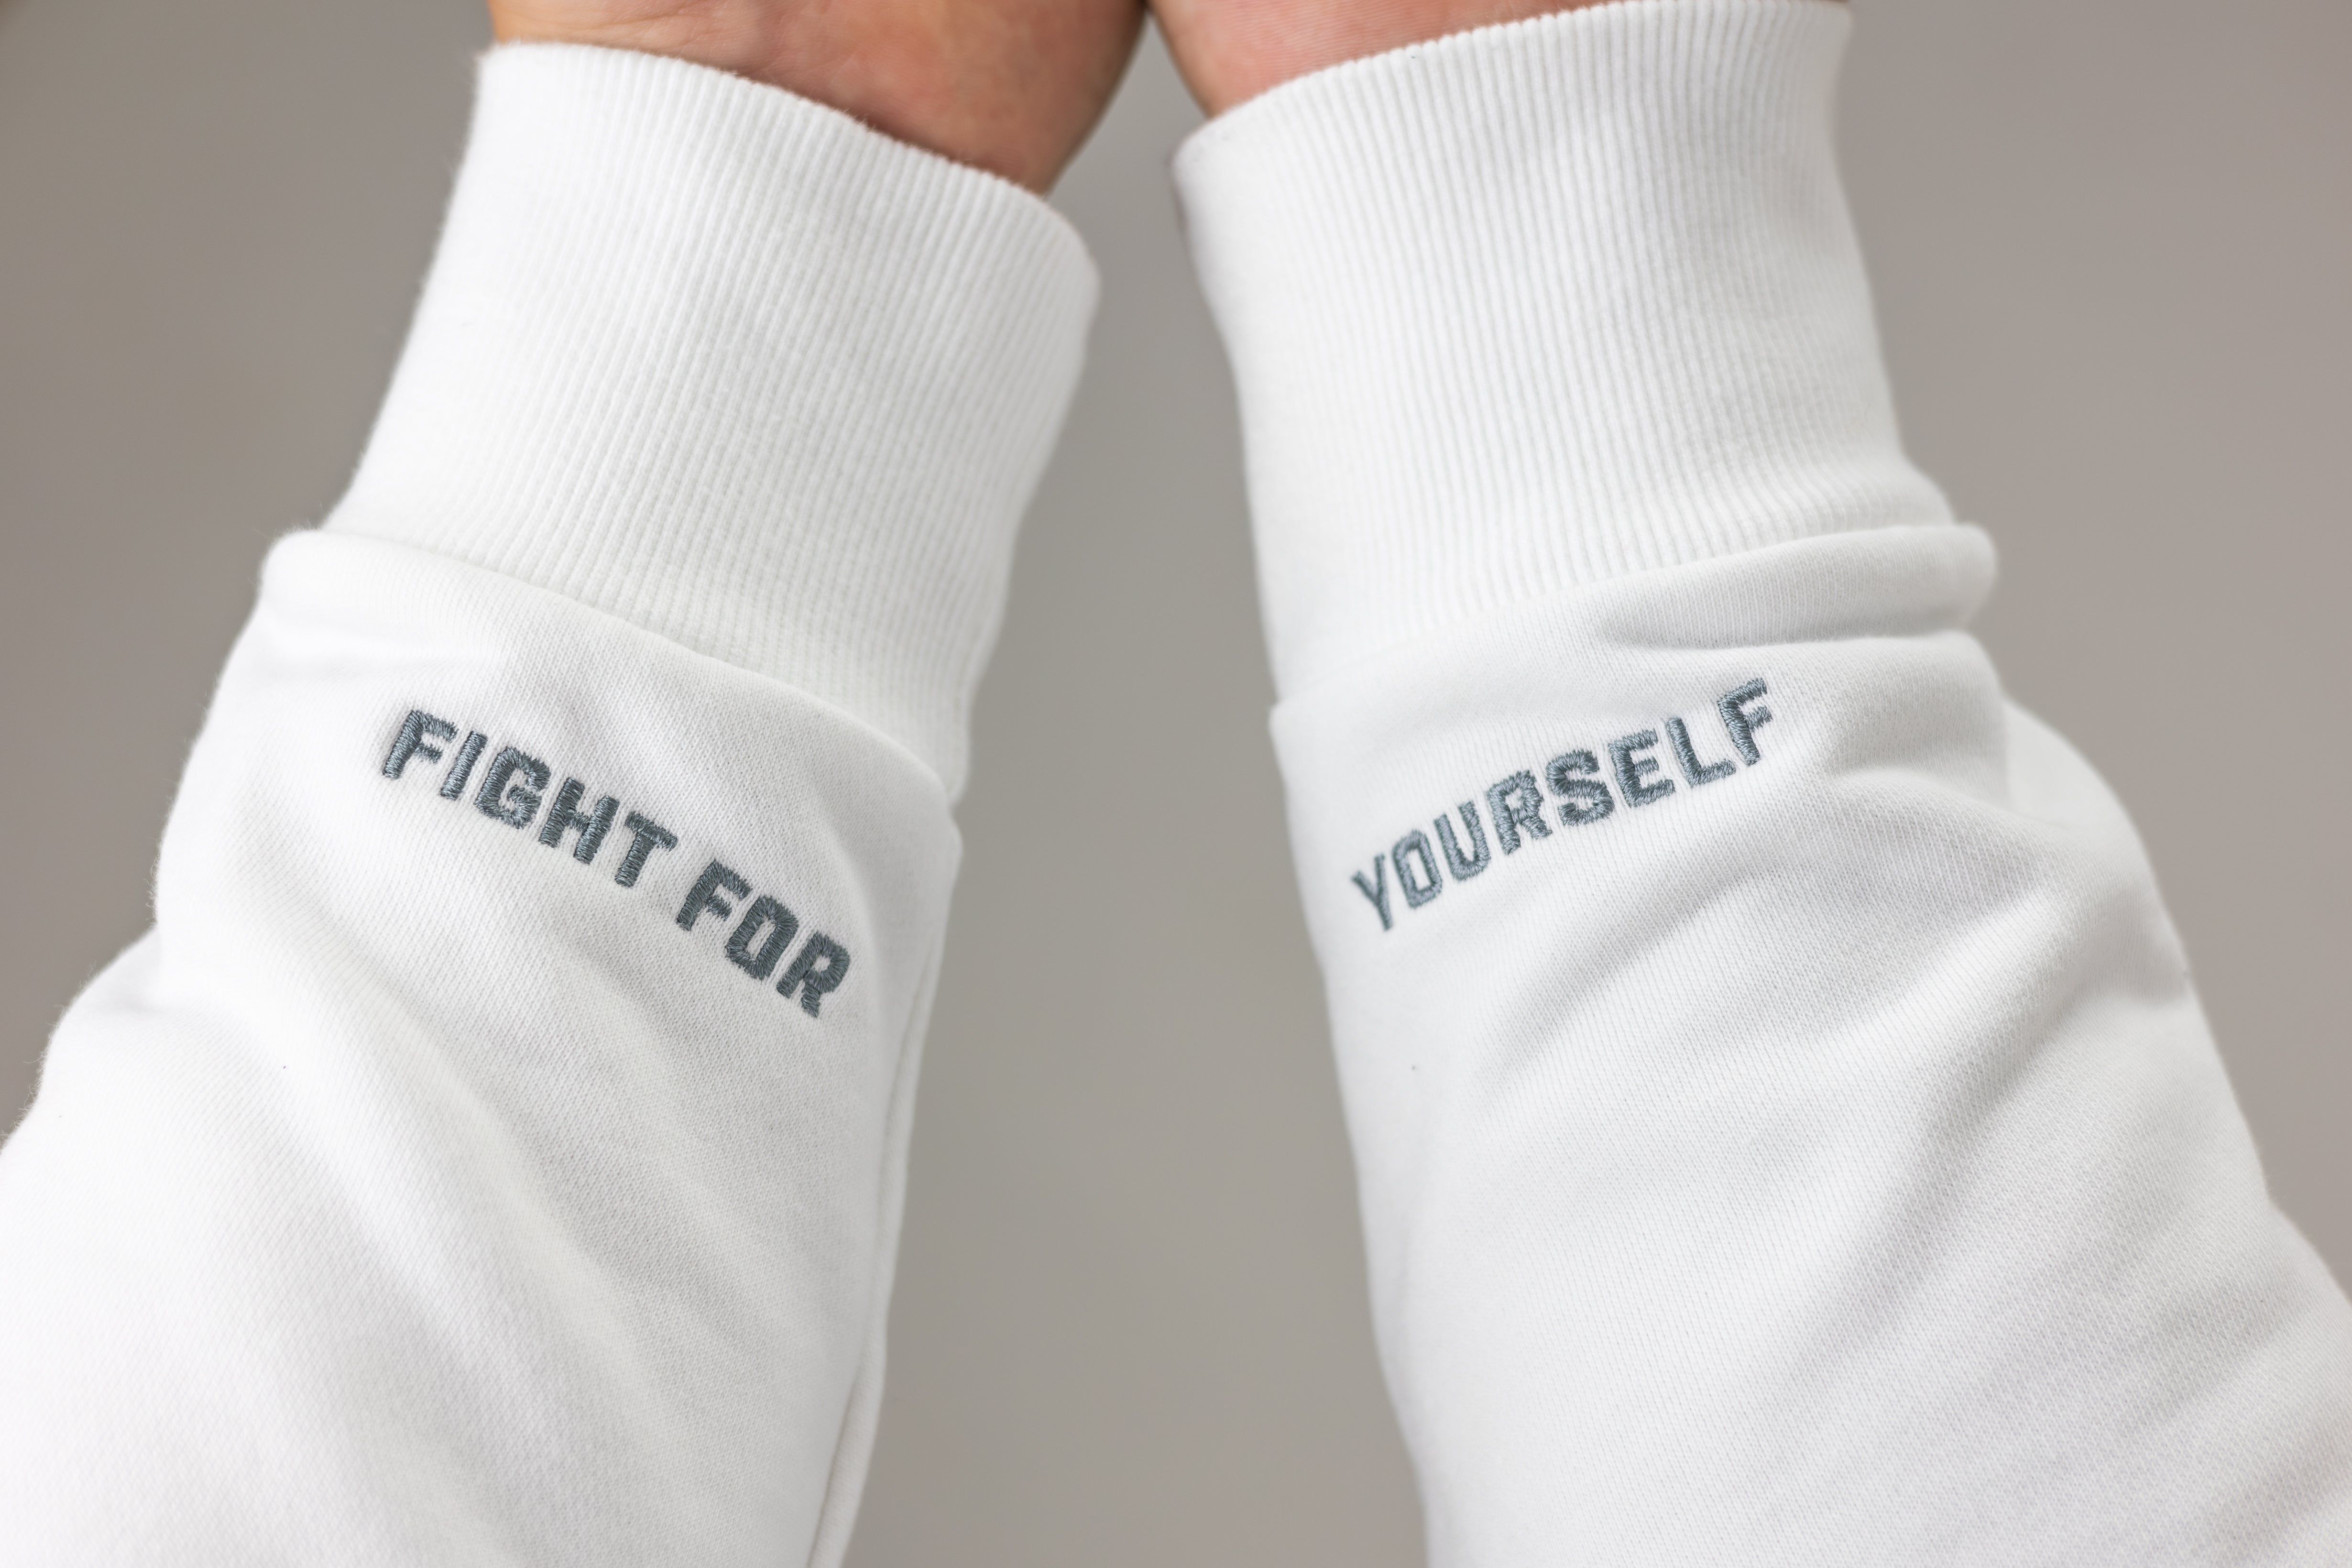 Detail photo of sleeves of white Mantra Hoodie that has "Fight For" embroidered on the left wrist and "Yourself" embroidered on the right wrist